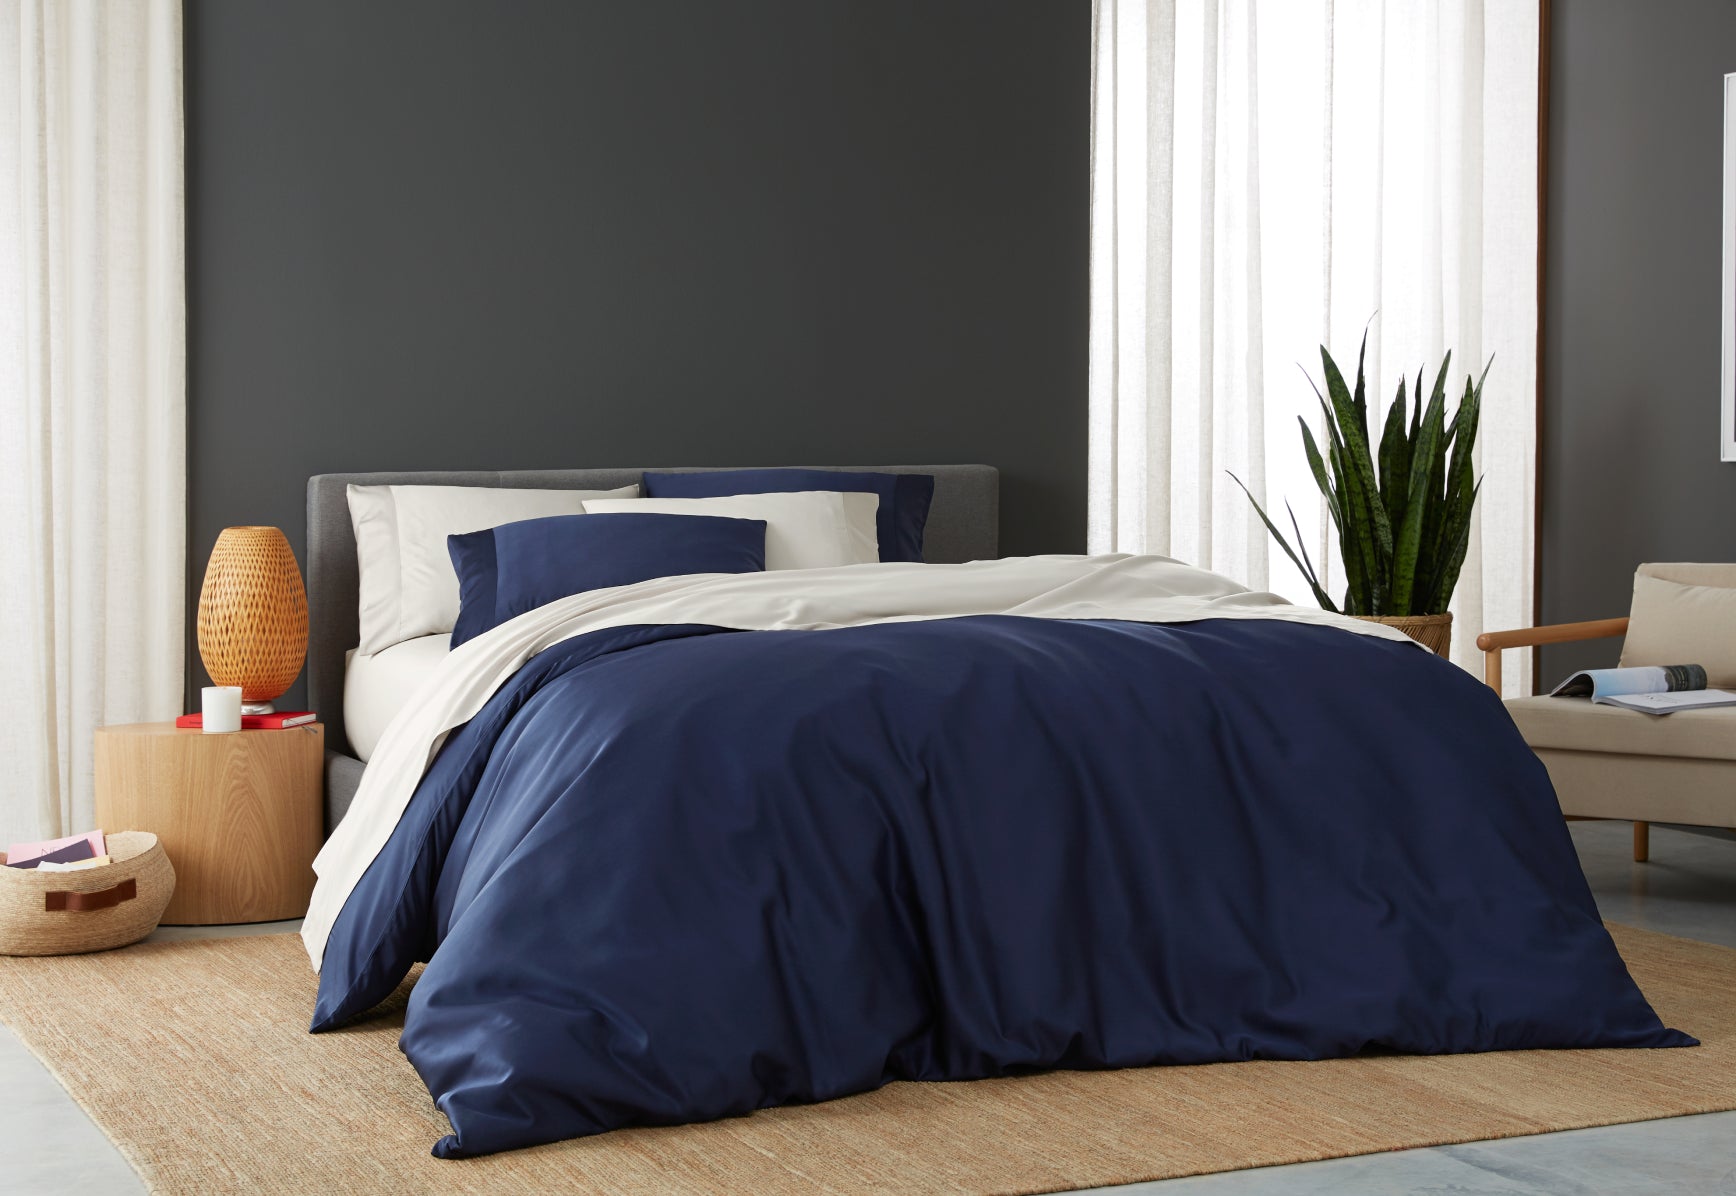 featured review onDOZ Bamboo Duvet Cover Set